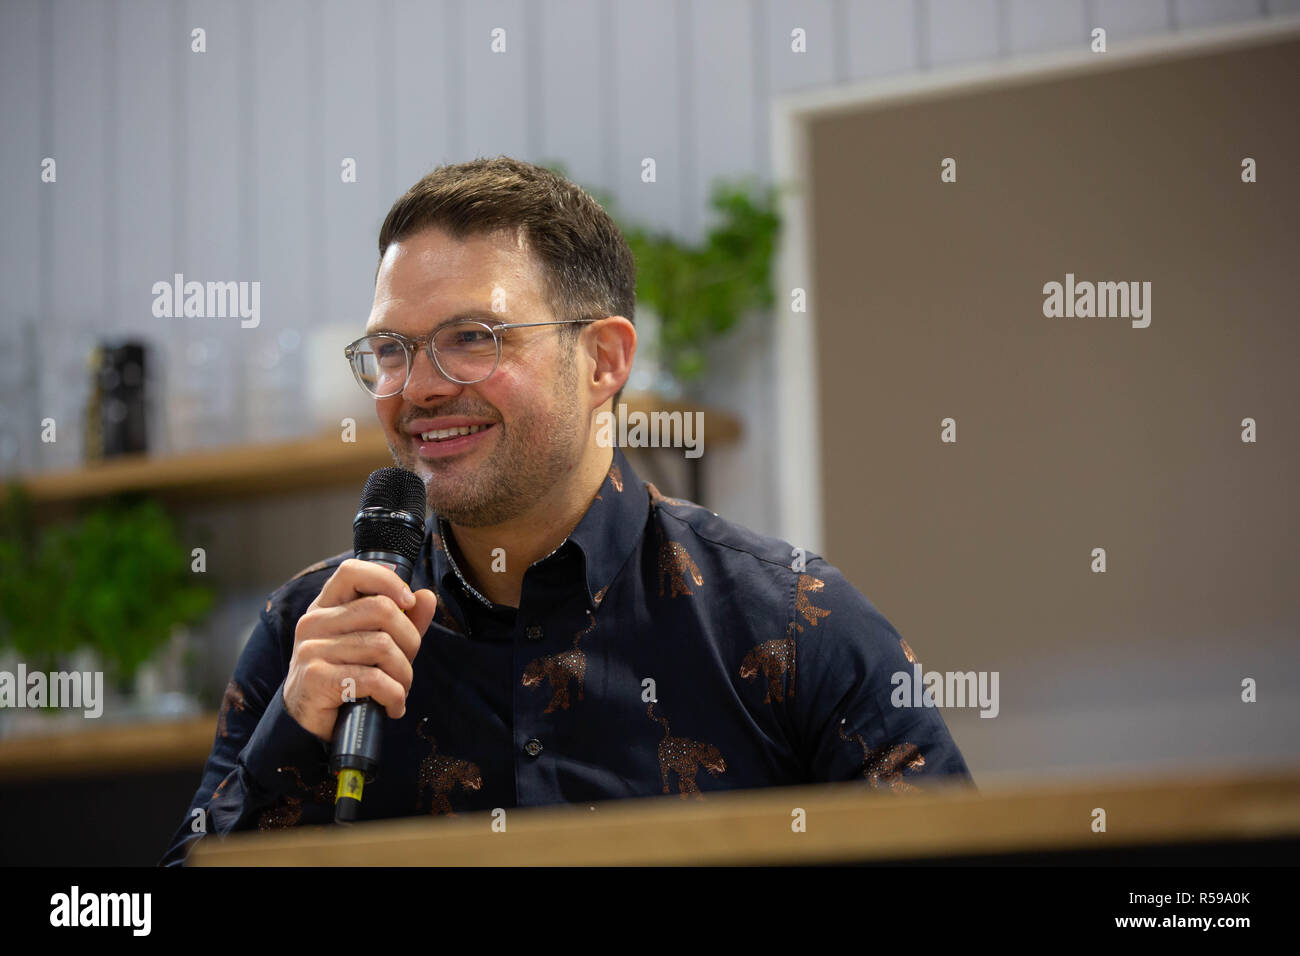 Birmingham, UK. 30th Nov, 2018. 2018 Masterchef champion Kenny Tutt chatting about what he has been up to after winning the show and his future plans Credit: steven roe/Alamy Live News Stock Photo